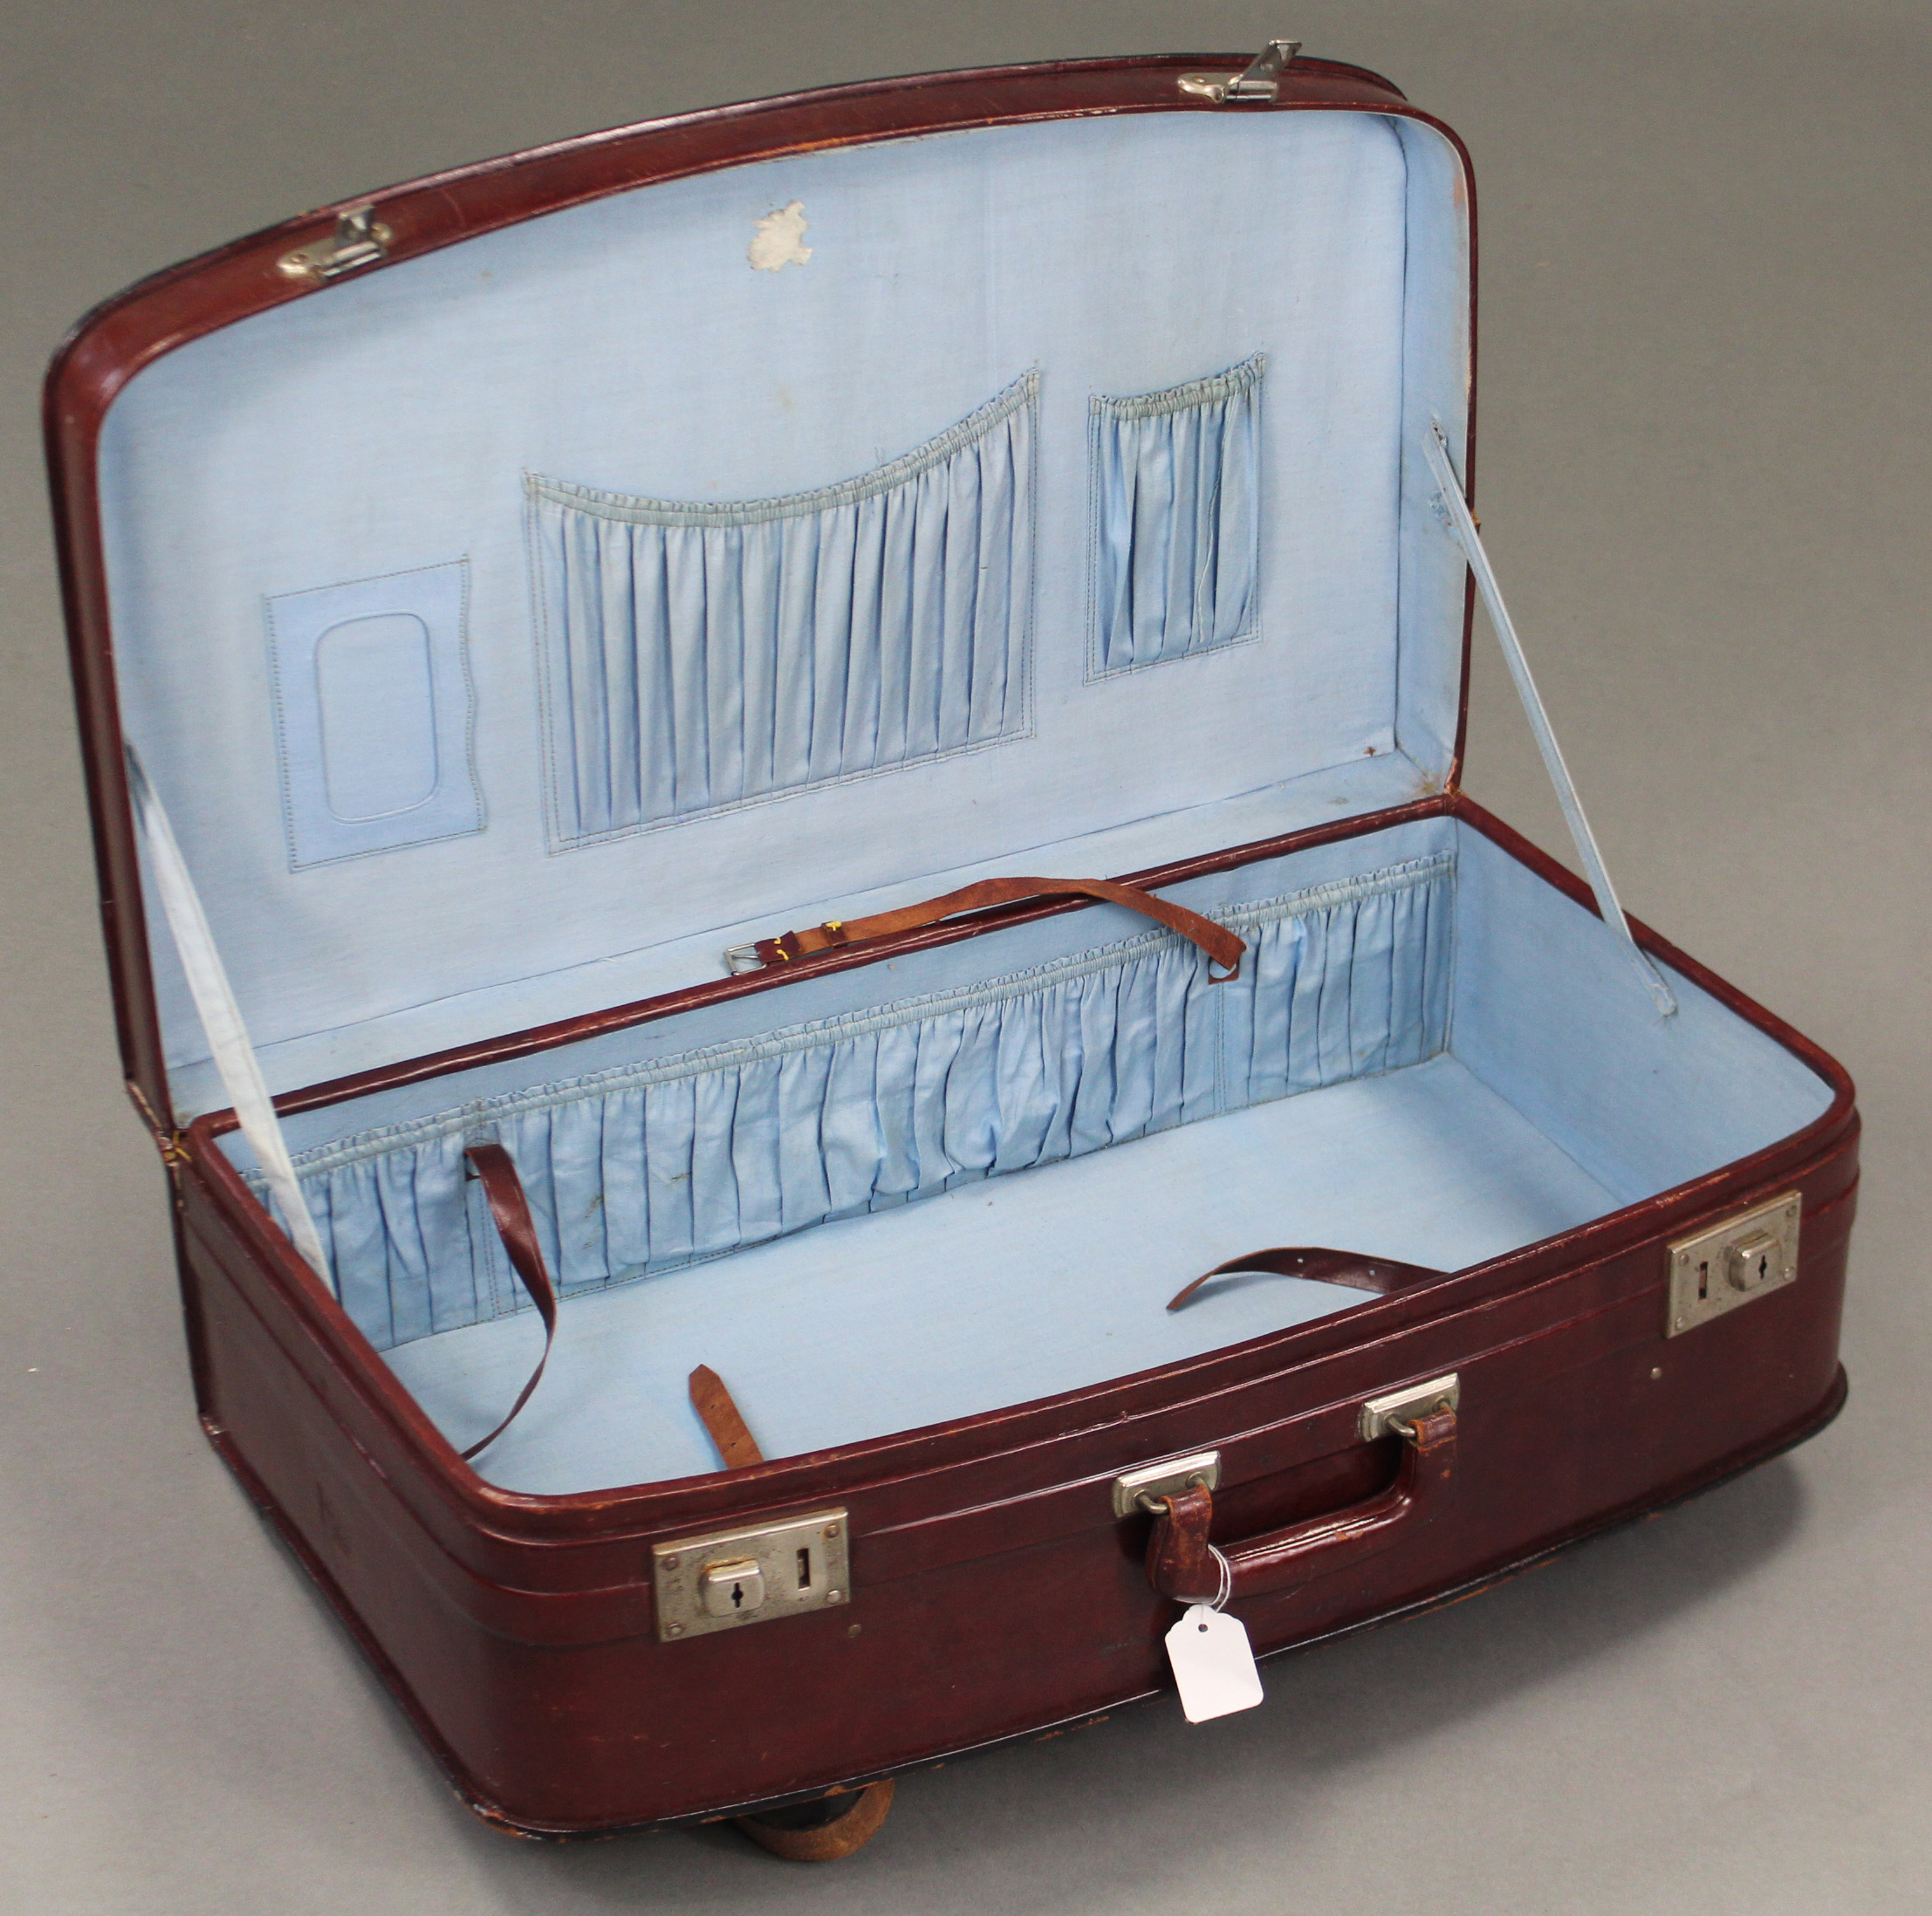 A Chinese “Rhinoceros” brand brown leather large suitcase by the Fook Seng Company; together with - Image 3 of 6